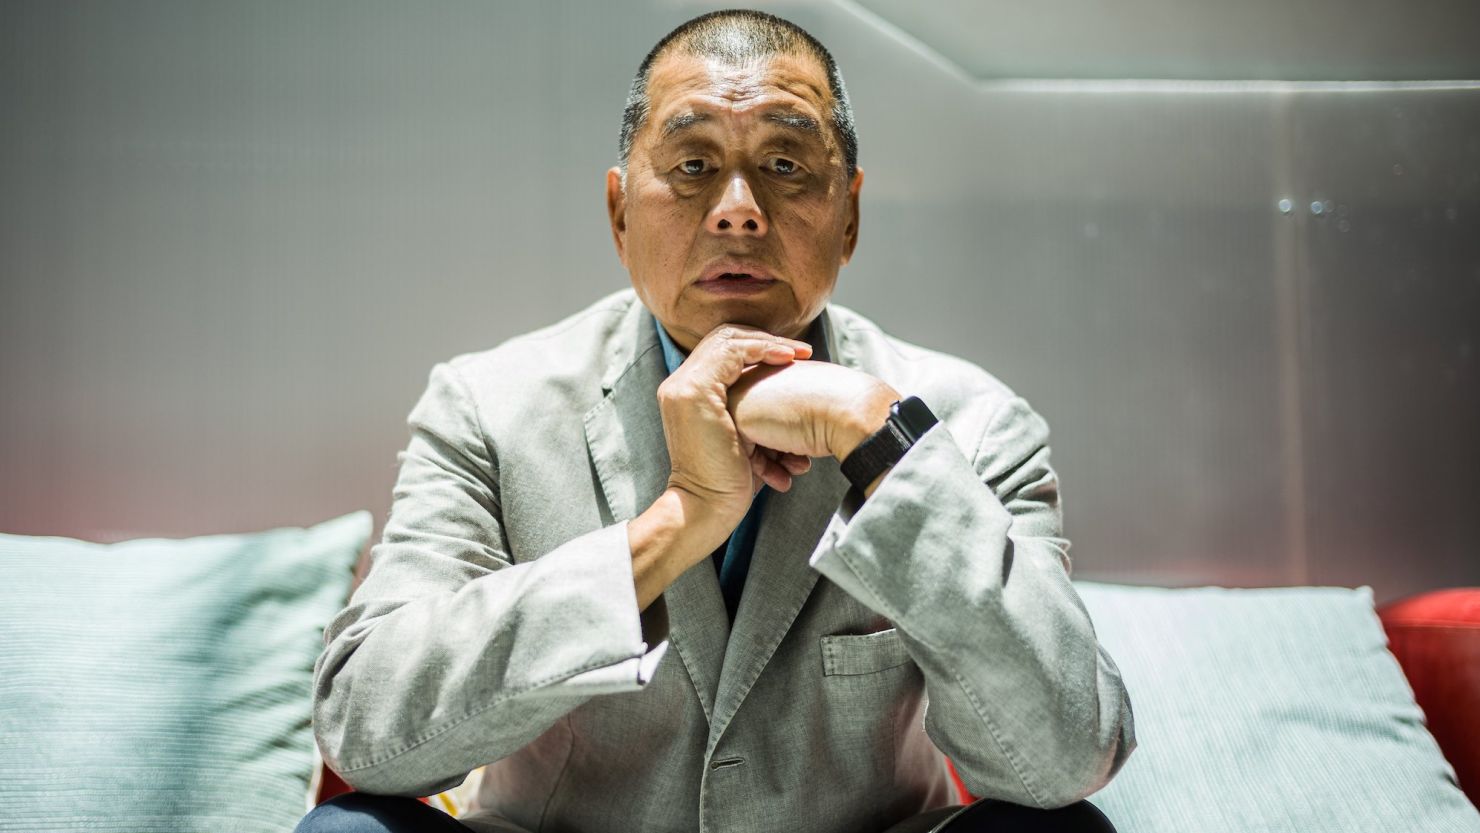 In this picture taken on June 16, 2020, millionaire media tycoon Jimmy Lai, 72, poses during an interview with AFP at the Next Digital offices in Hong Kong. - Lai knows his support for Hong Kong's pro-democracy protests could soon land him behind bars, but the proudly self-described "troublemaker" says he has no regrets. (Photo by Anthony WALLACE / AFP) (Photo by ANTHONY WALLACE/AFP via Getty Images)